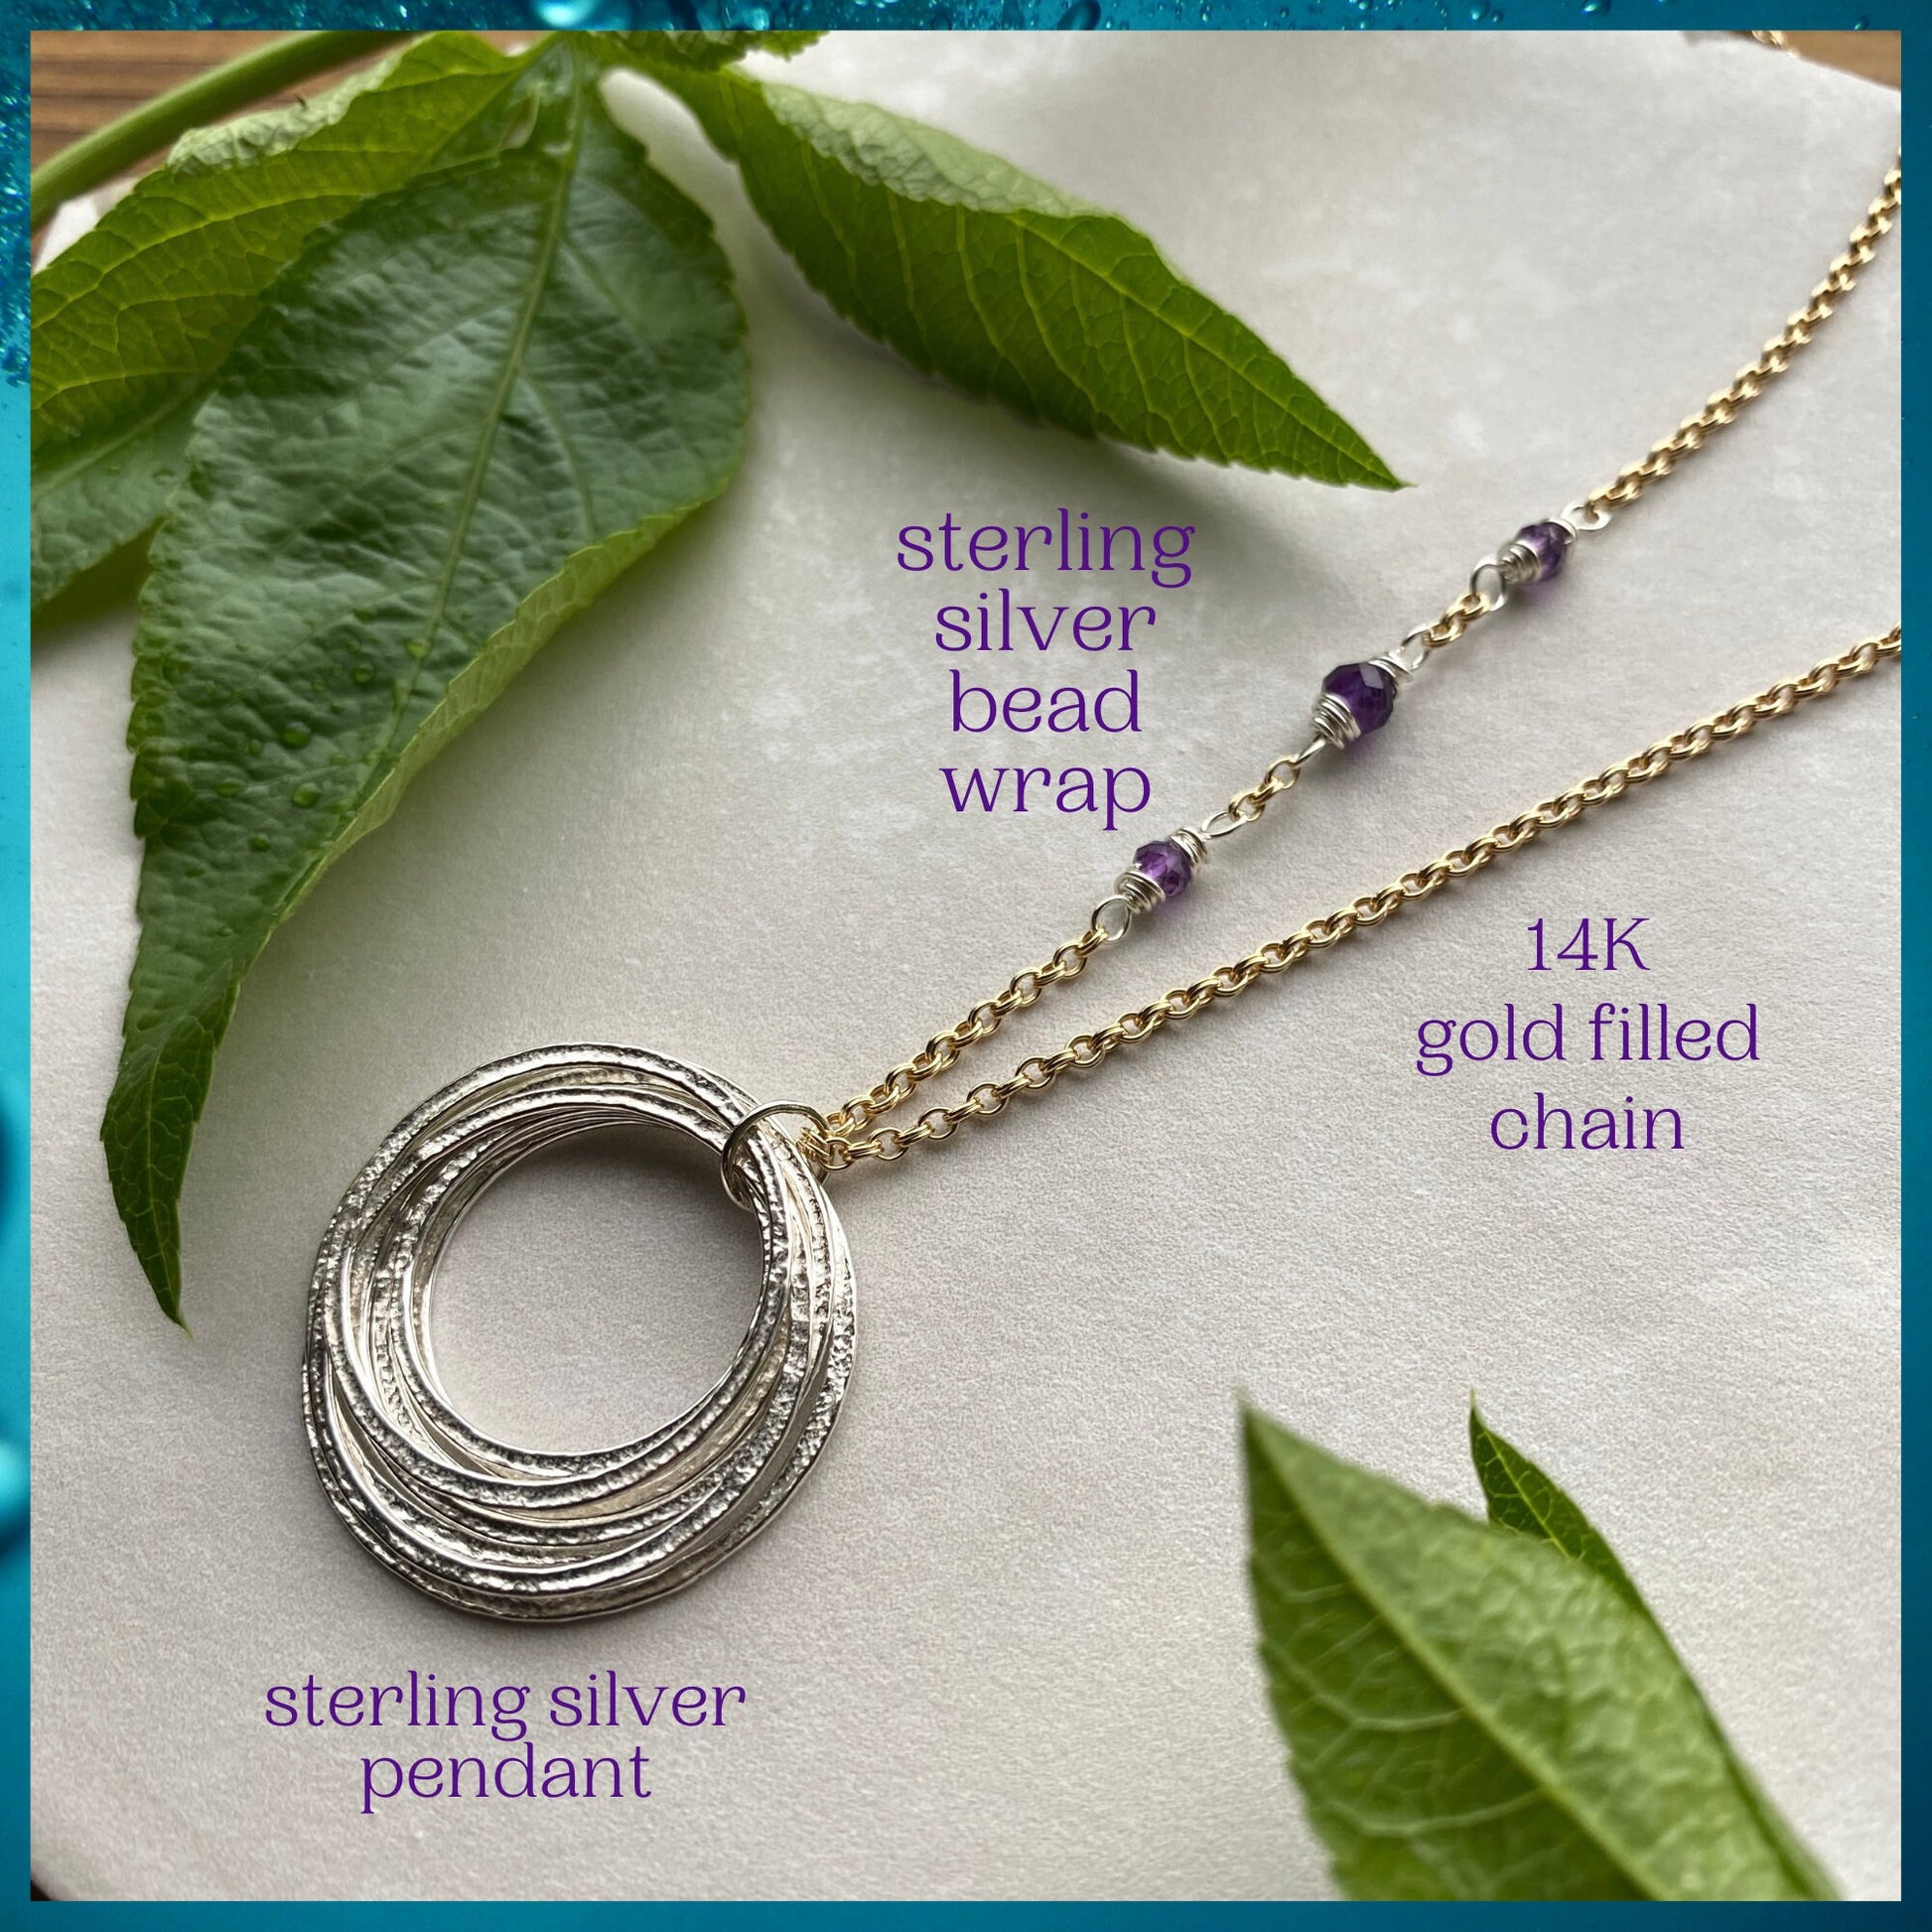 8 Circle 80th Birthday Milestone Necklace - Mixed Metal 14K Gold Fill & Sterling Silver Eight Rings for 8 Decades Sparkly Circles Pendant on Elegant Chain with Birthstone Gemstones - Handcrafted Unique Meaningful Jewelry Gift for Eightieth Birthdays